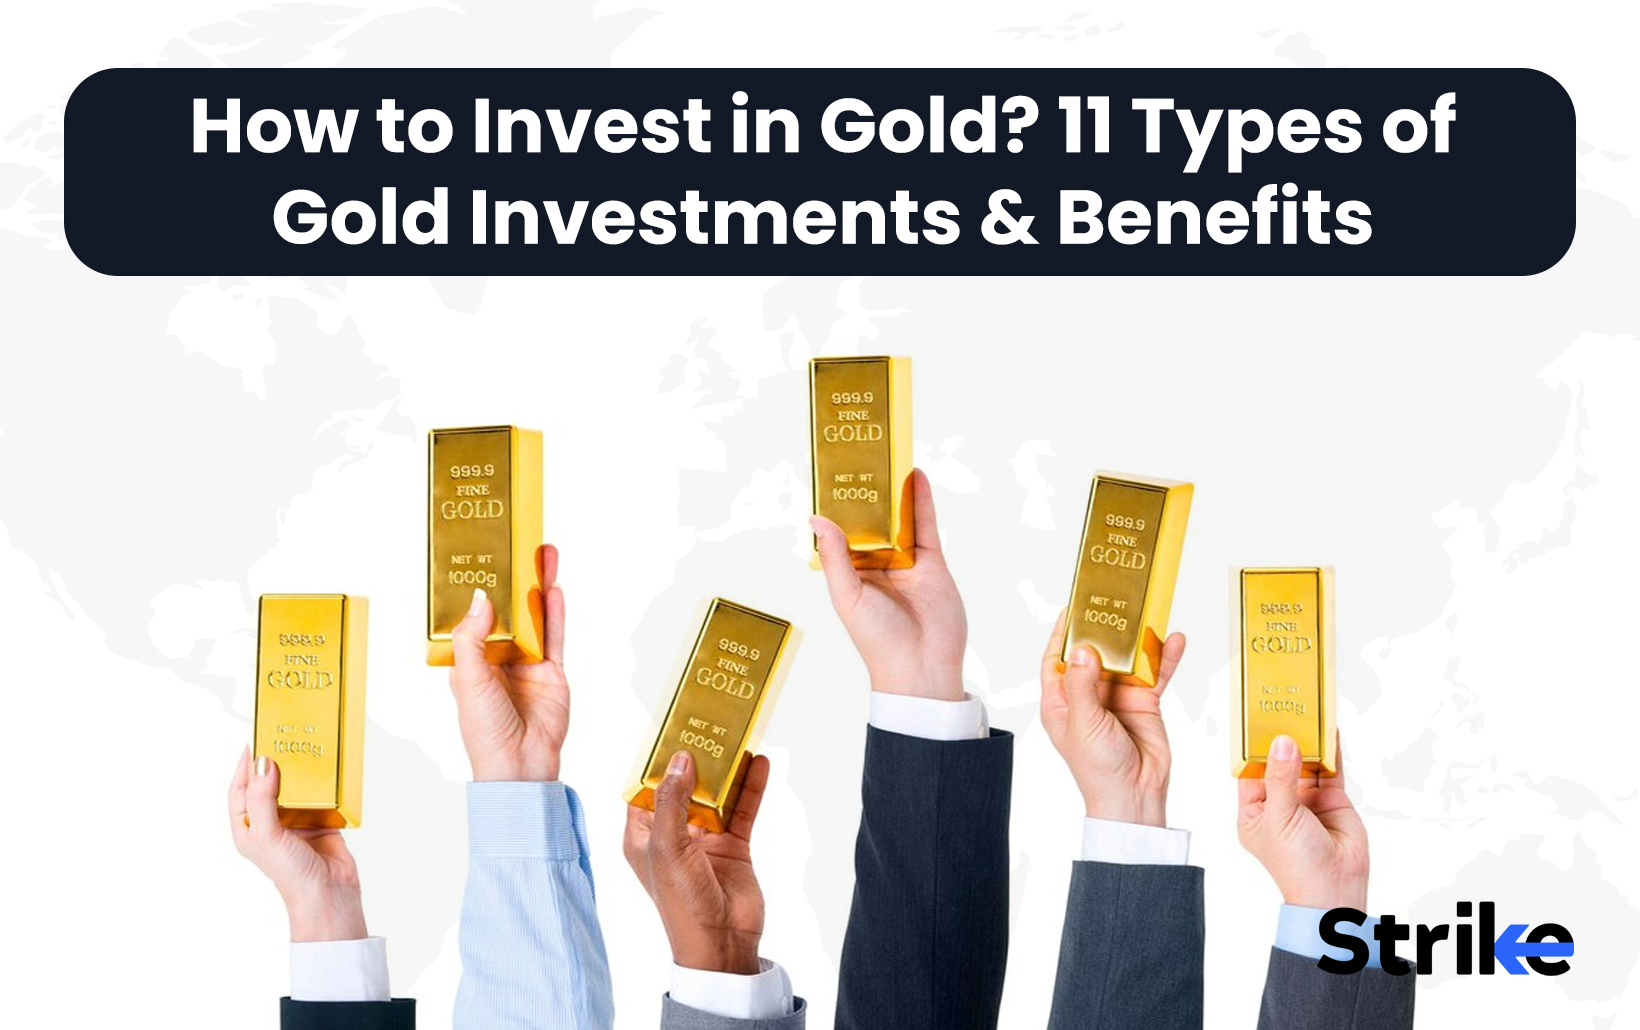 How to Invest in Gold? 11 Types of Gold Investments & Benefits